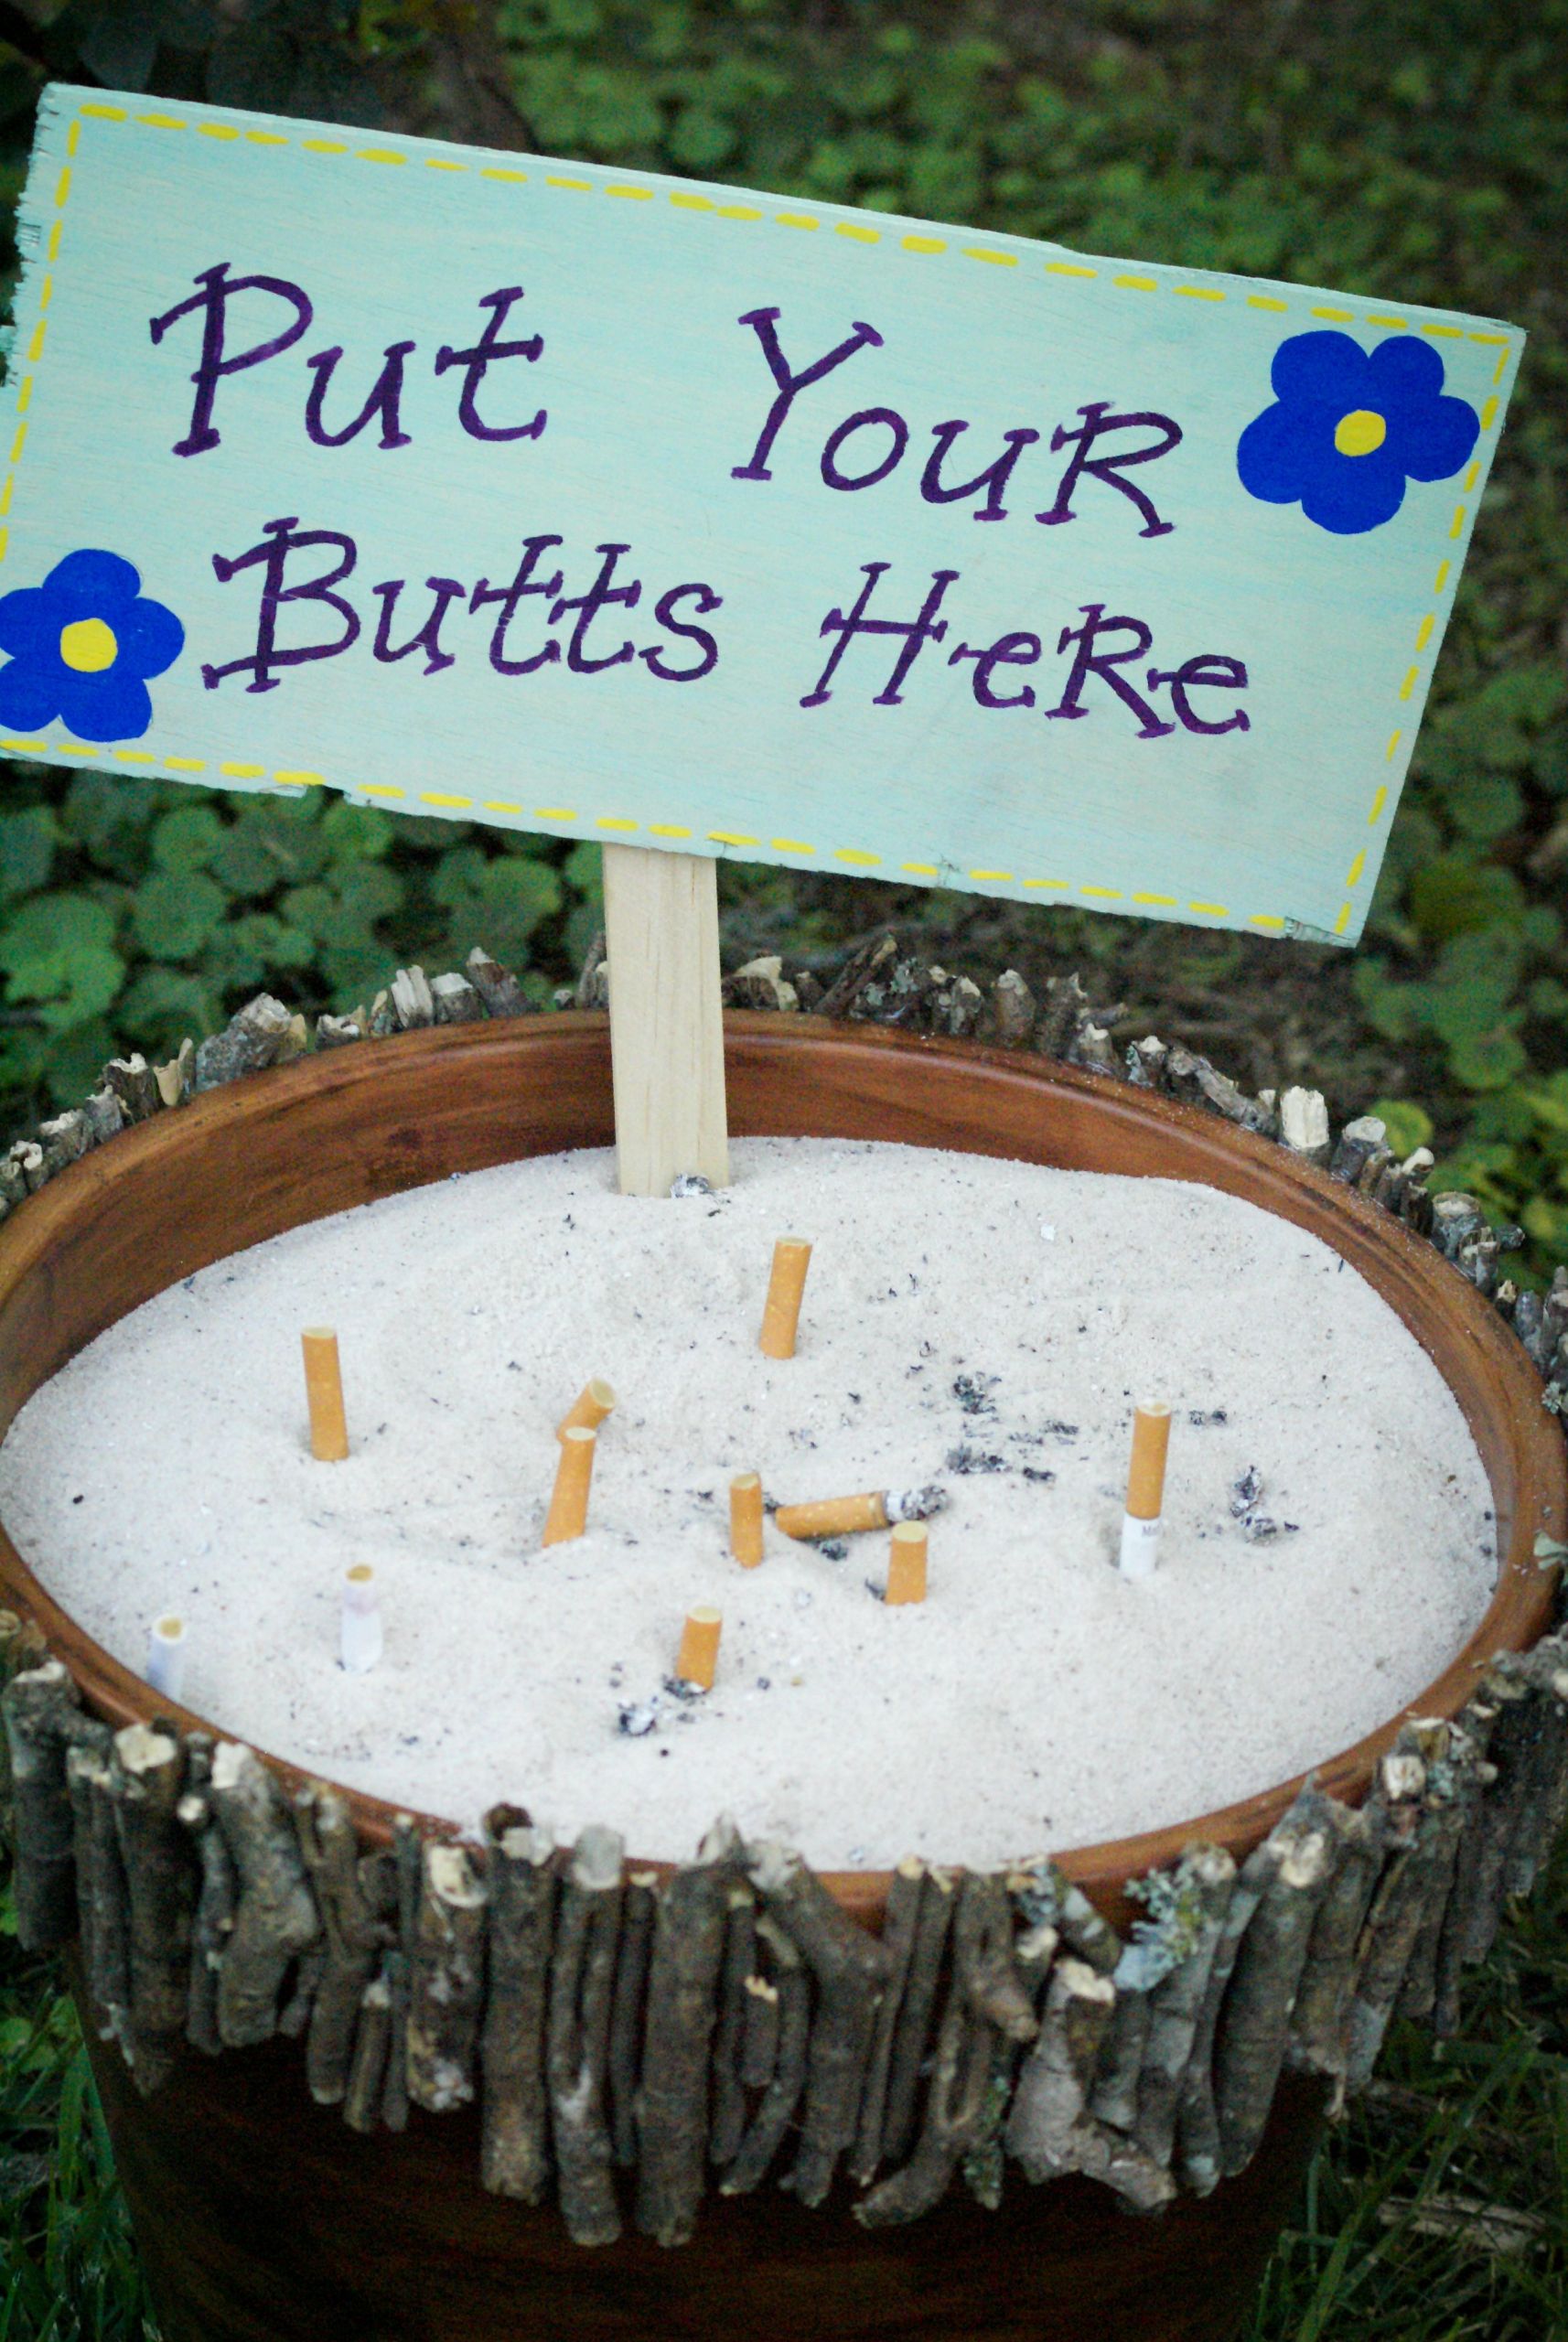 DIY Outdoor Ashtray
 Outdoor ashtray for the smokers So cute "Put your butts